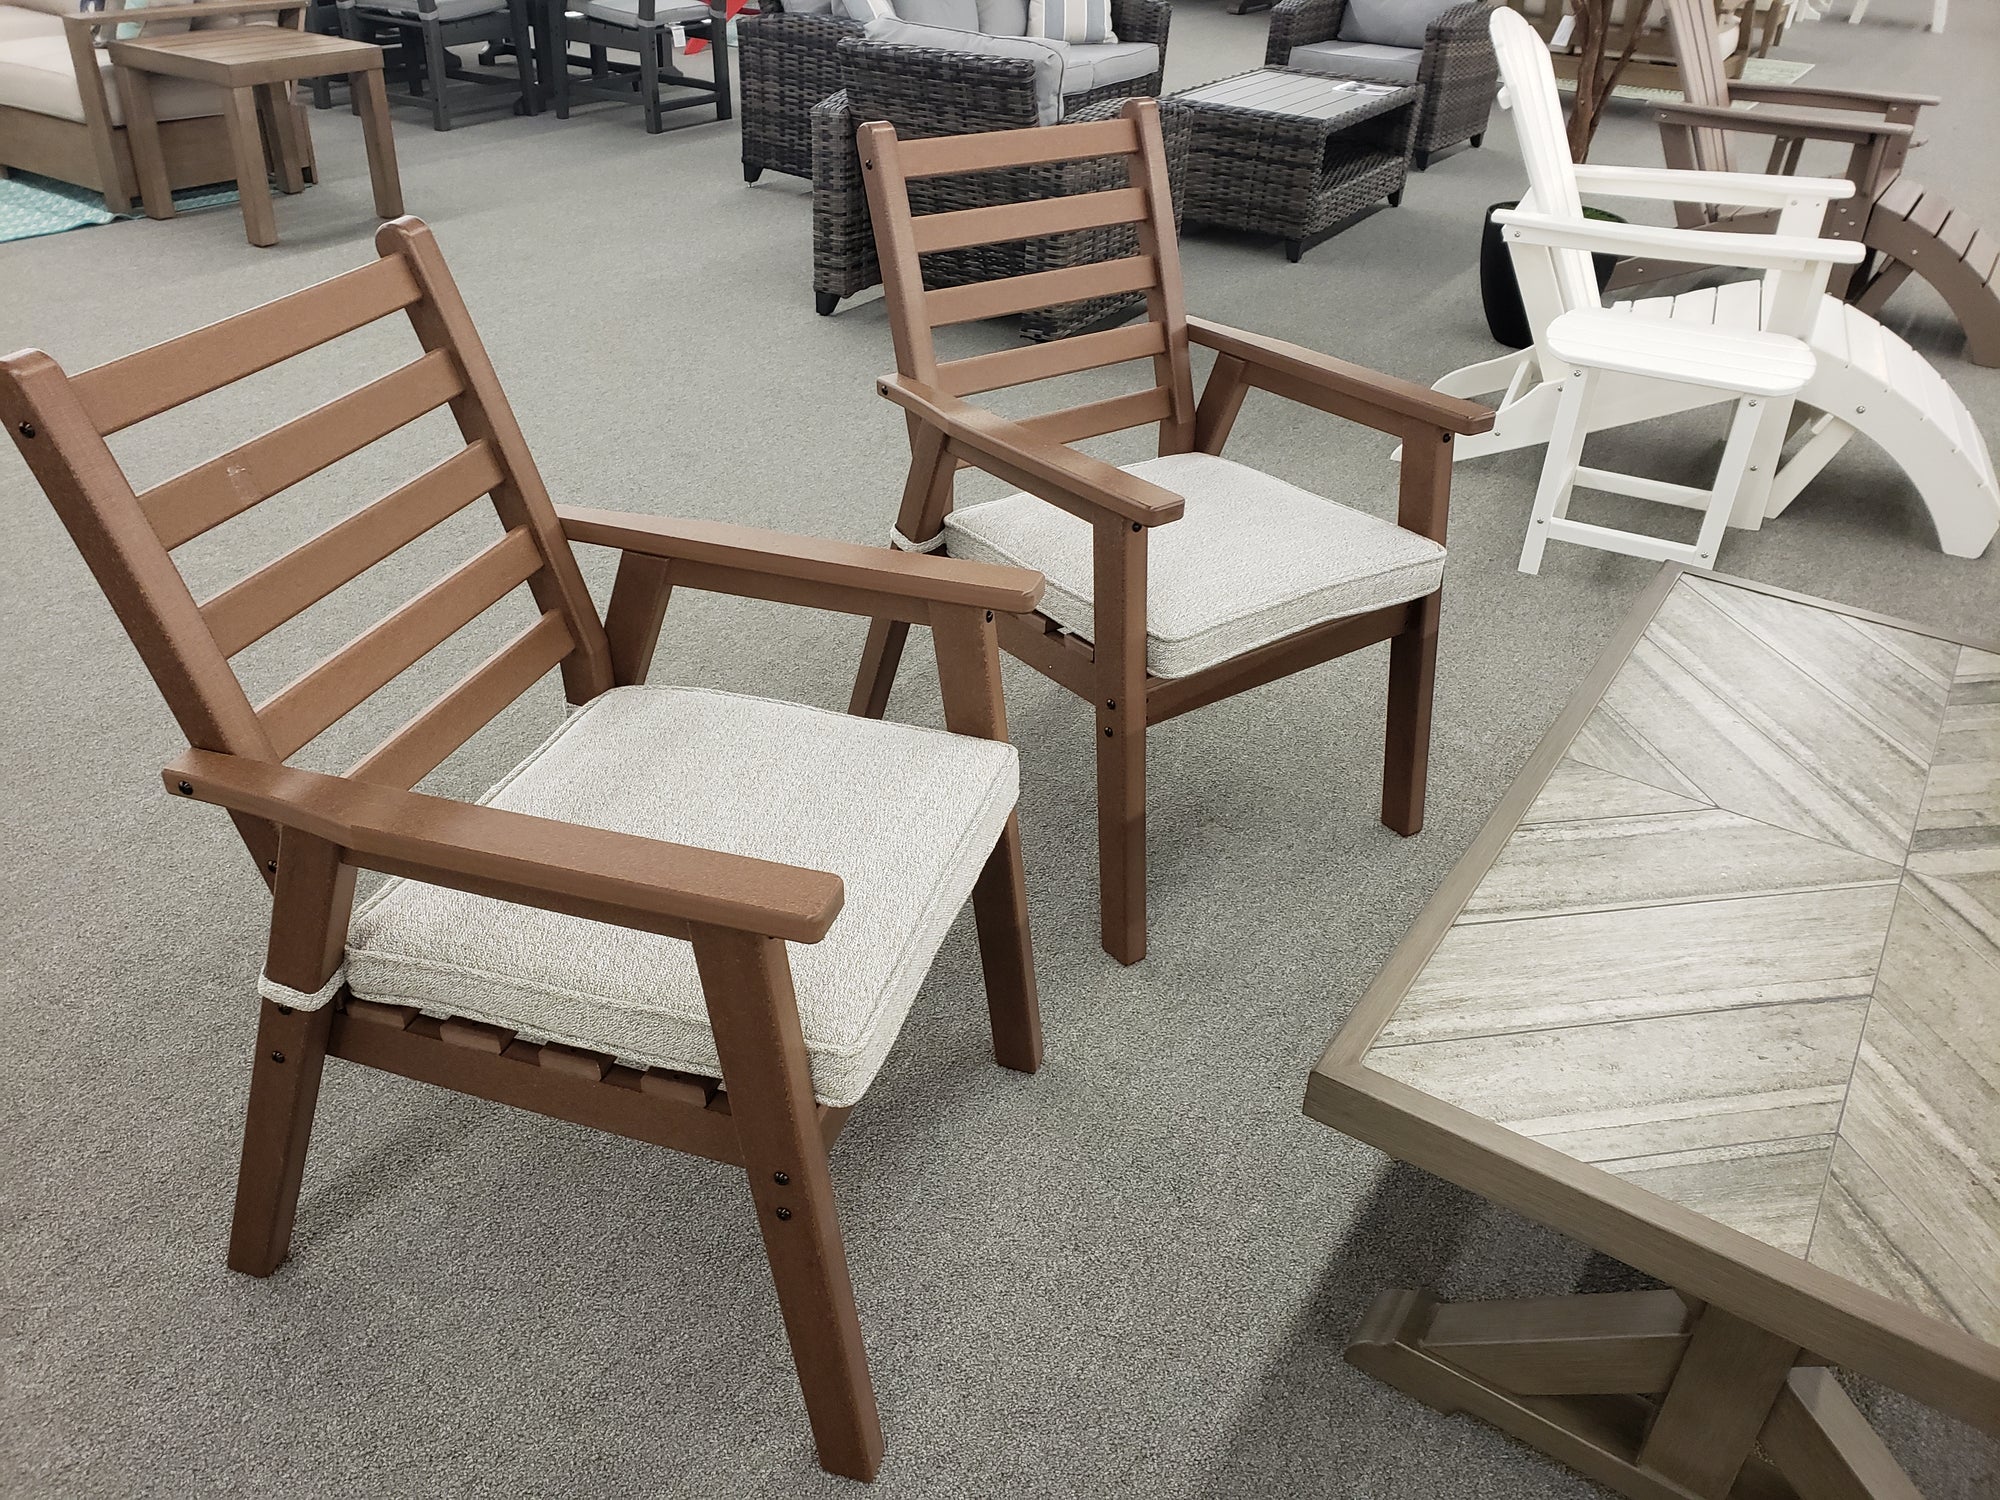 P531-FI-A 2 Piece Outdoor Arm Chairs